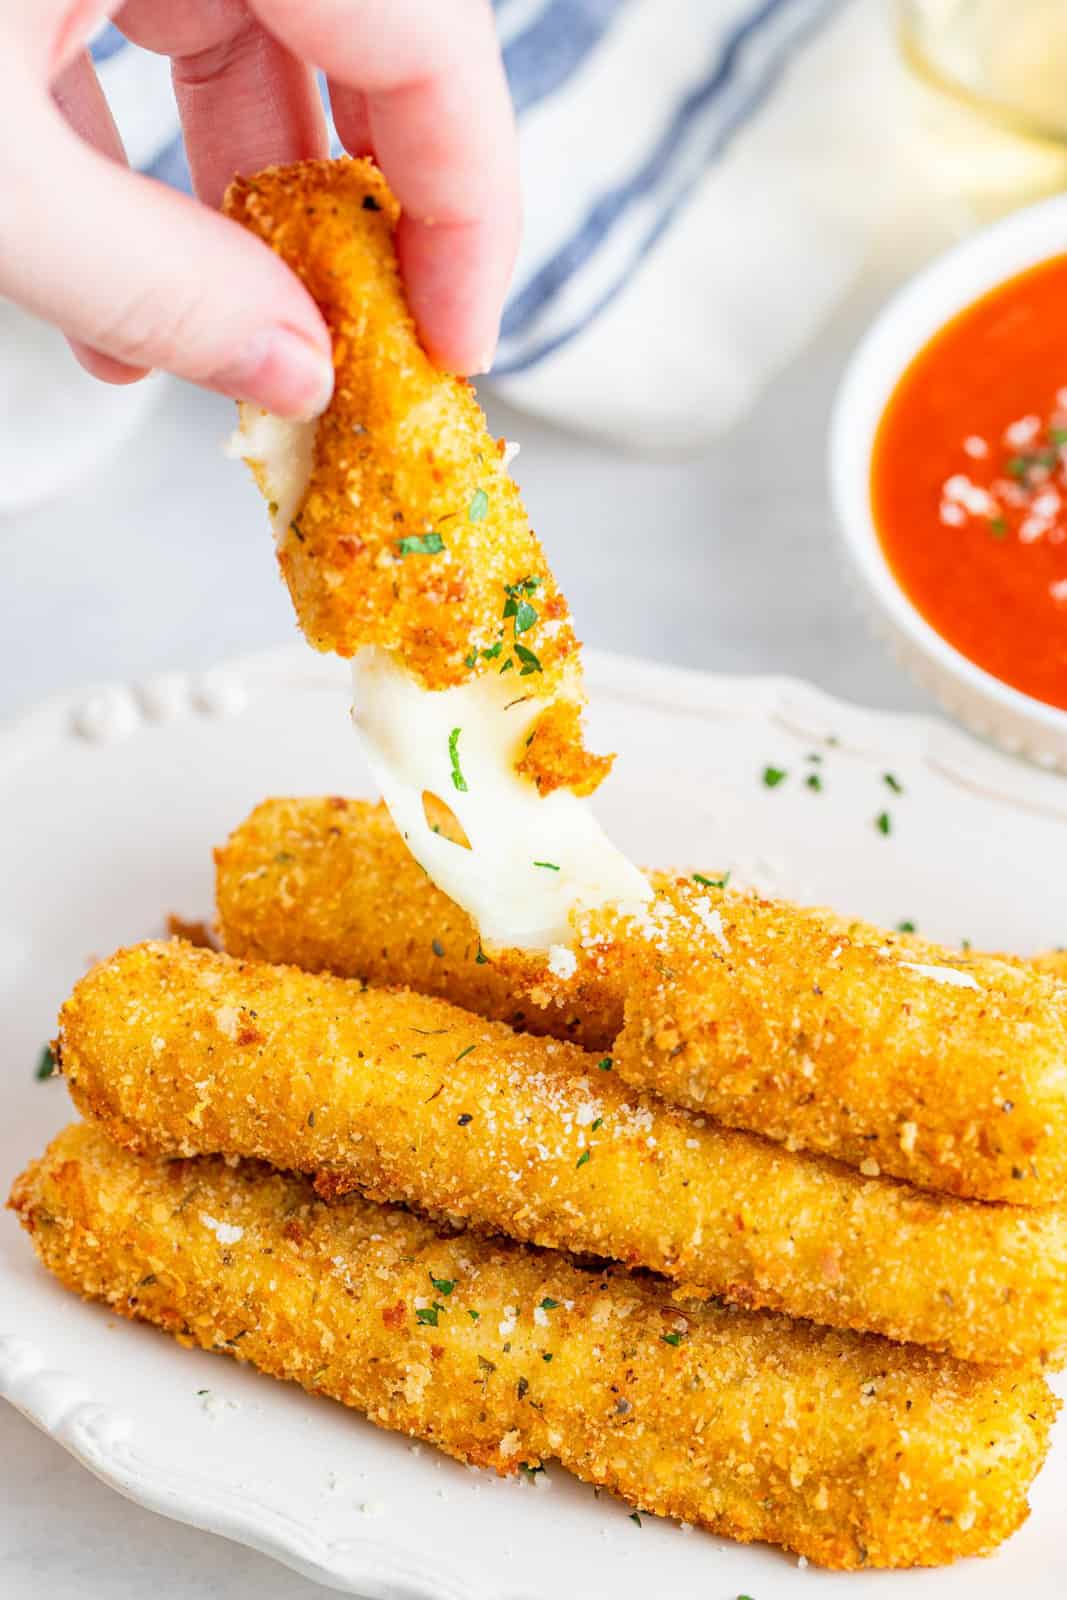 Hand breaking one mozzarella stick apart showing cheese pull